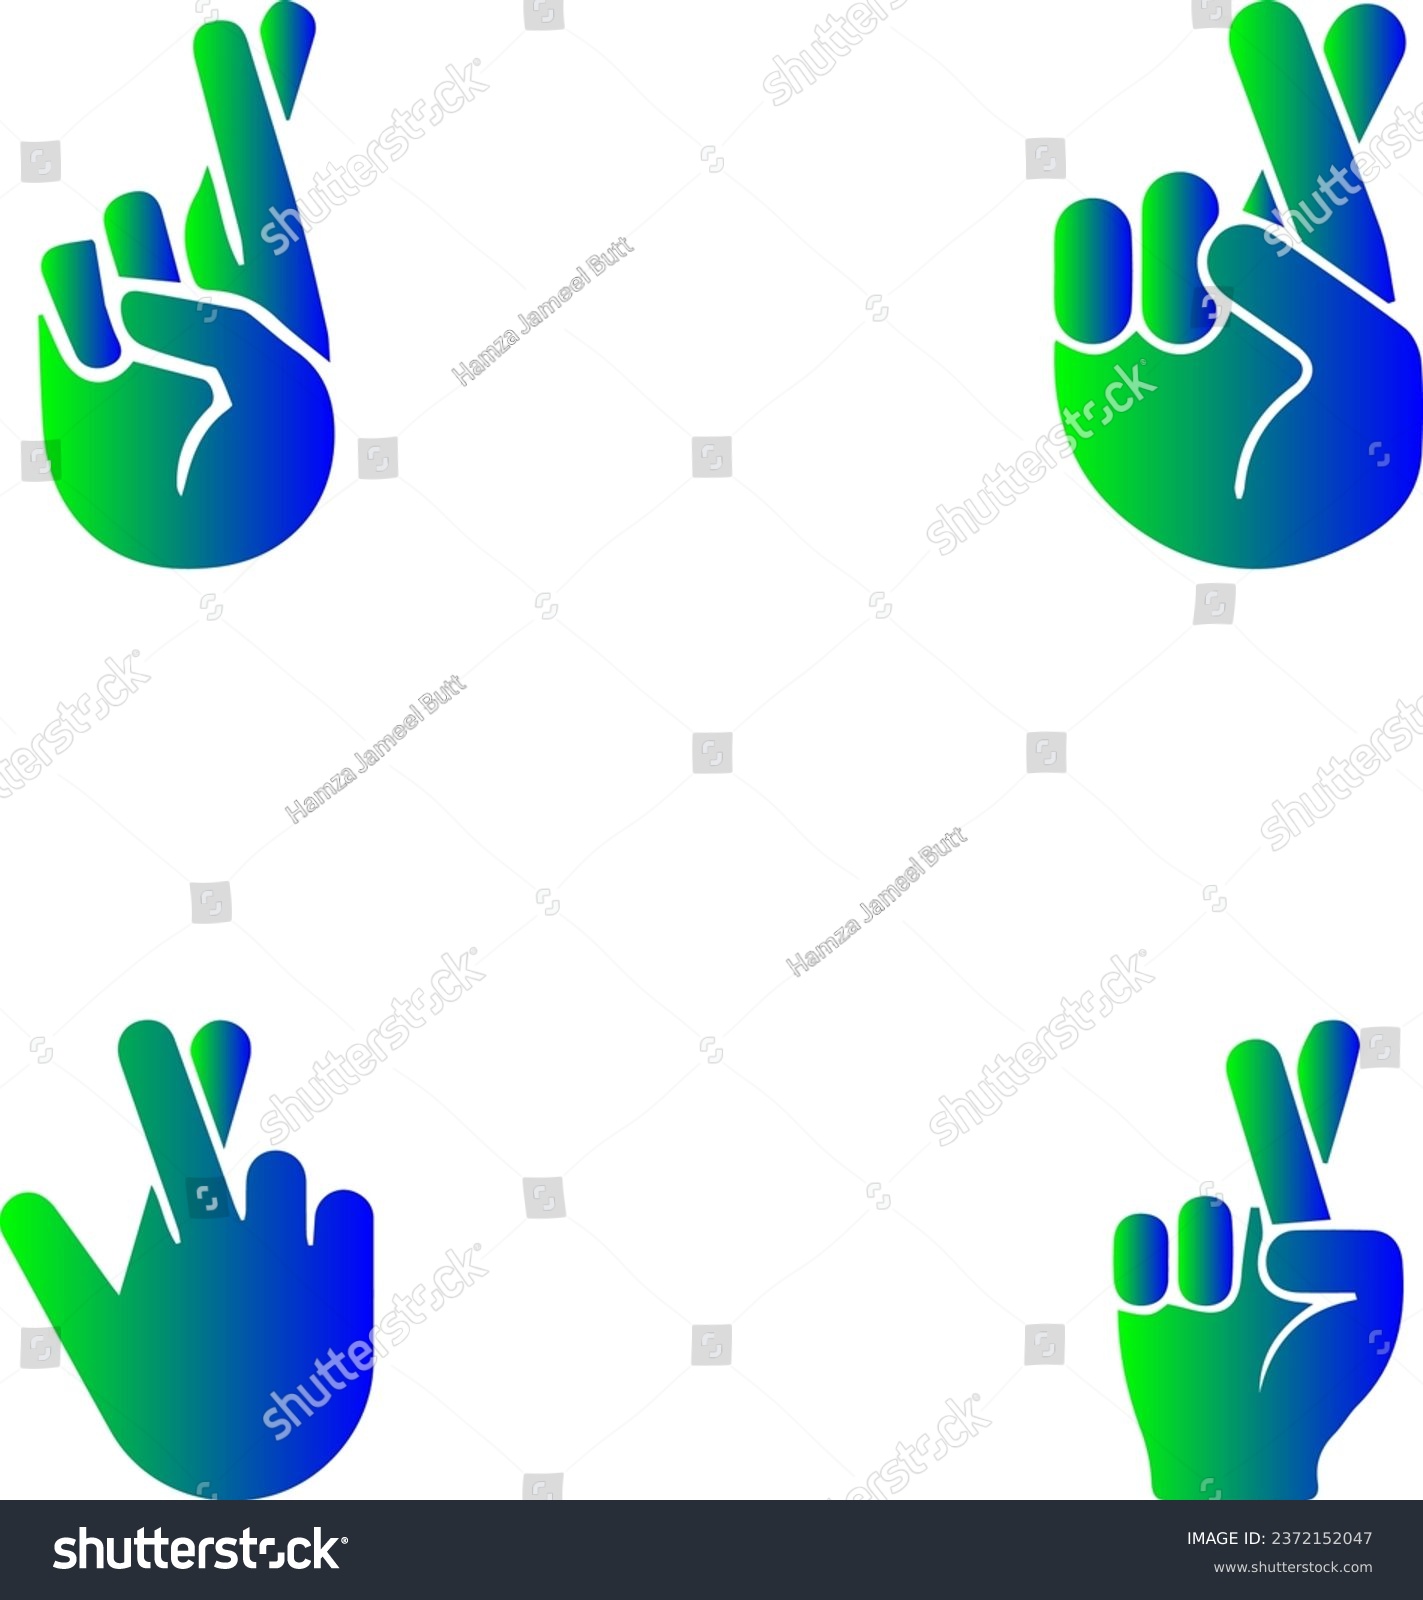 SVG of 
Crossed Fingers Icons

Embrace the universal gesture of hope and good fortune with these icons. These icons depict hands with crossed fingers, symbolizing luck and positive wishes.  svg